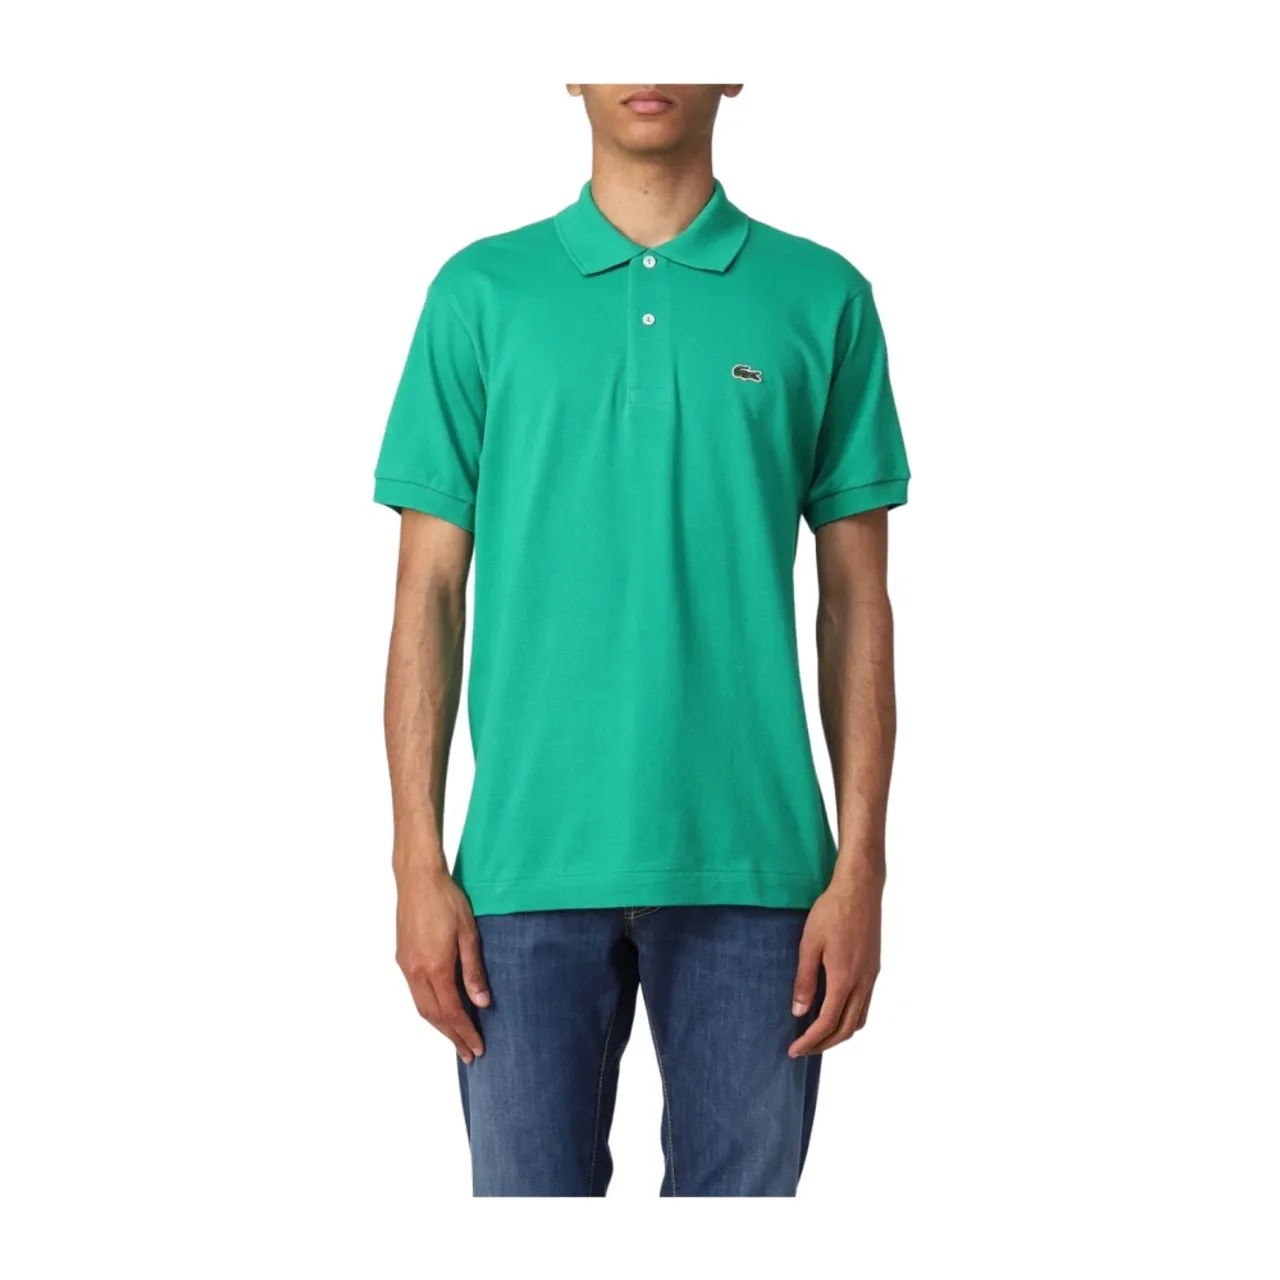 Lacoste , Classic Fit Polo Shirt ,Green male, Sizes: